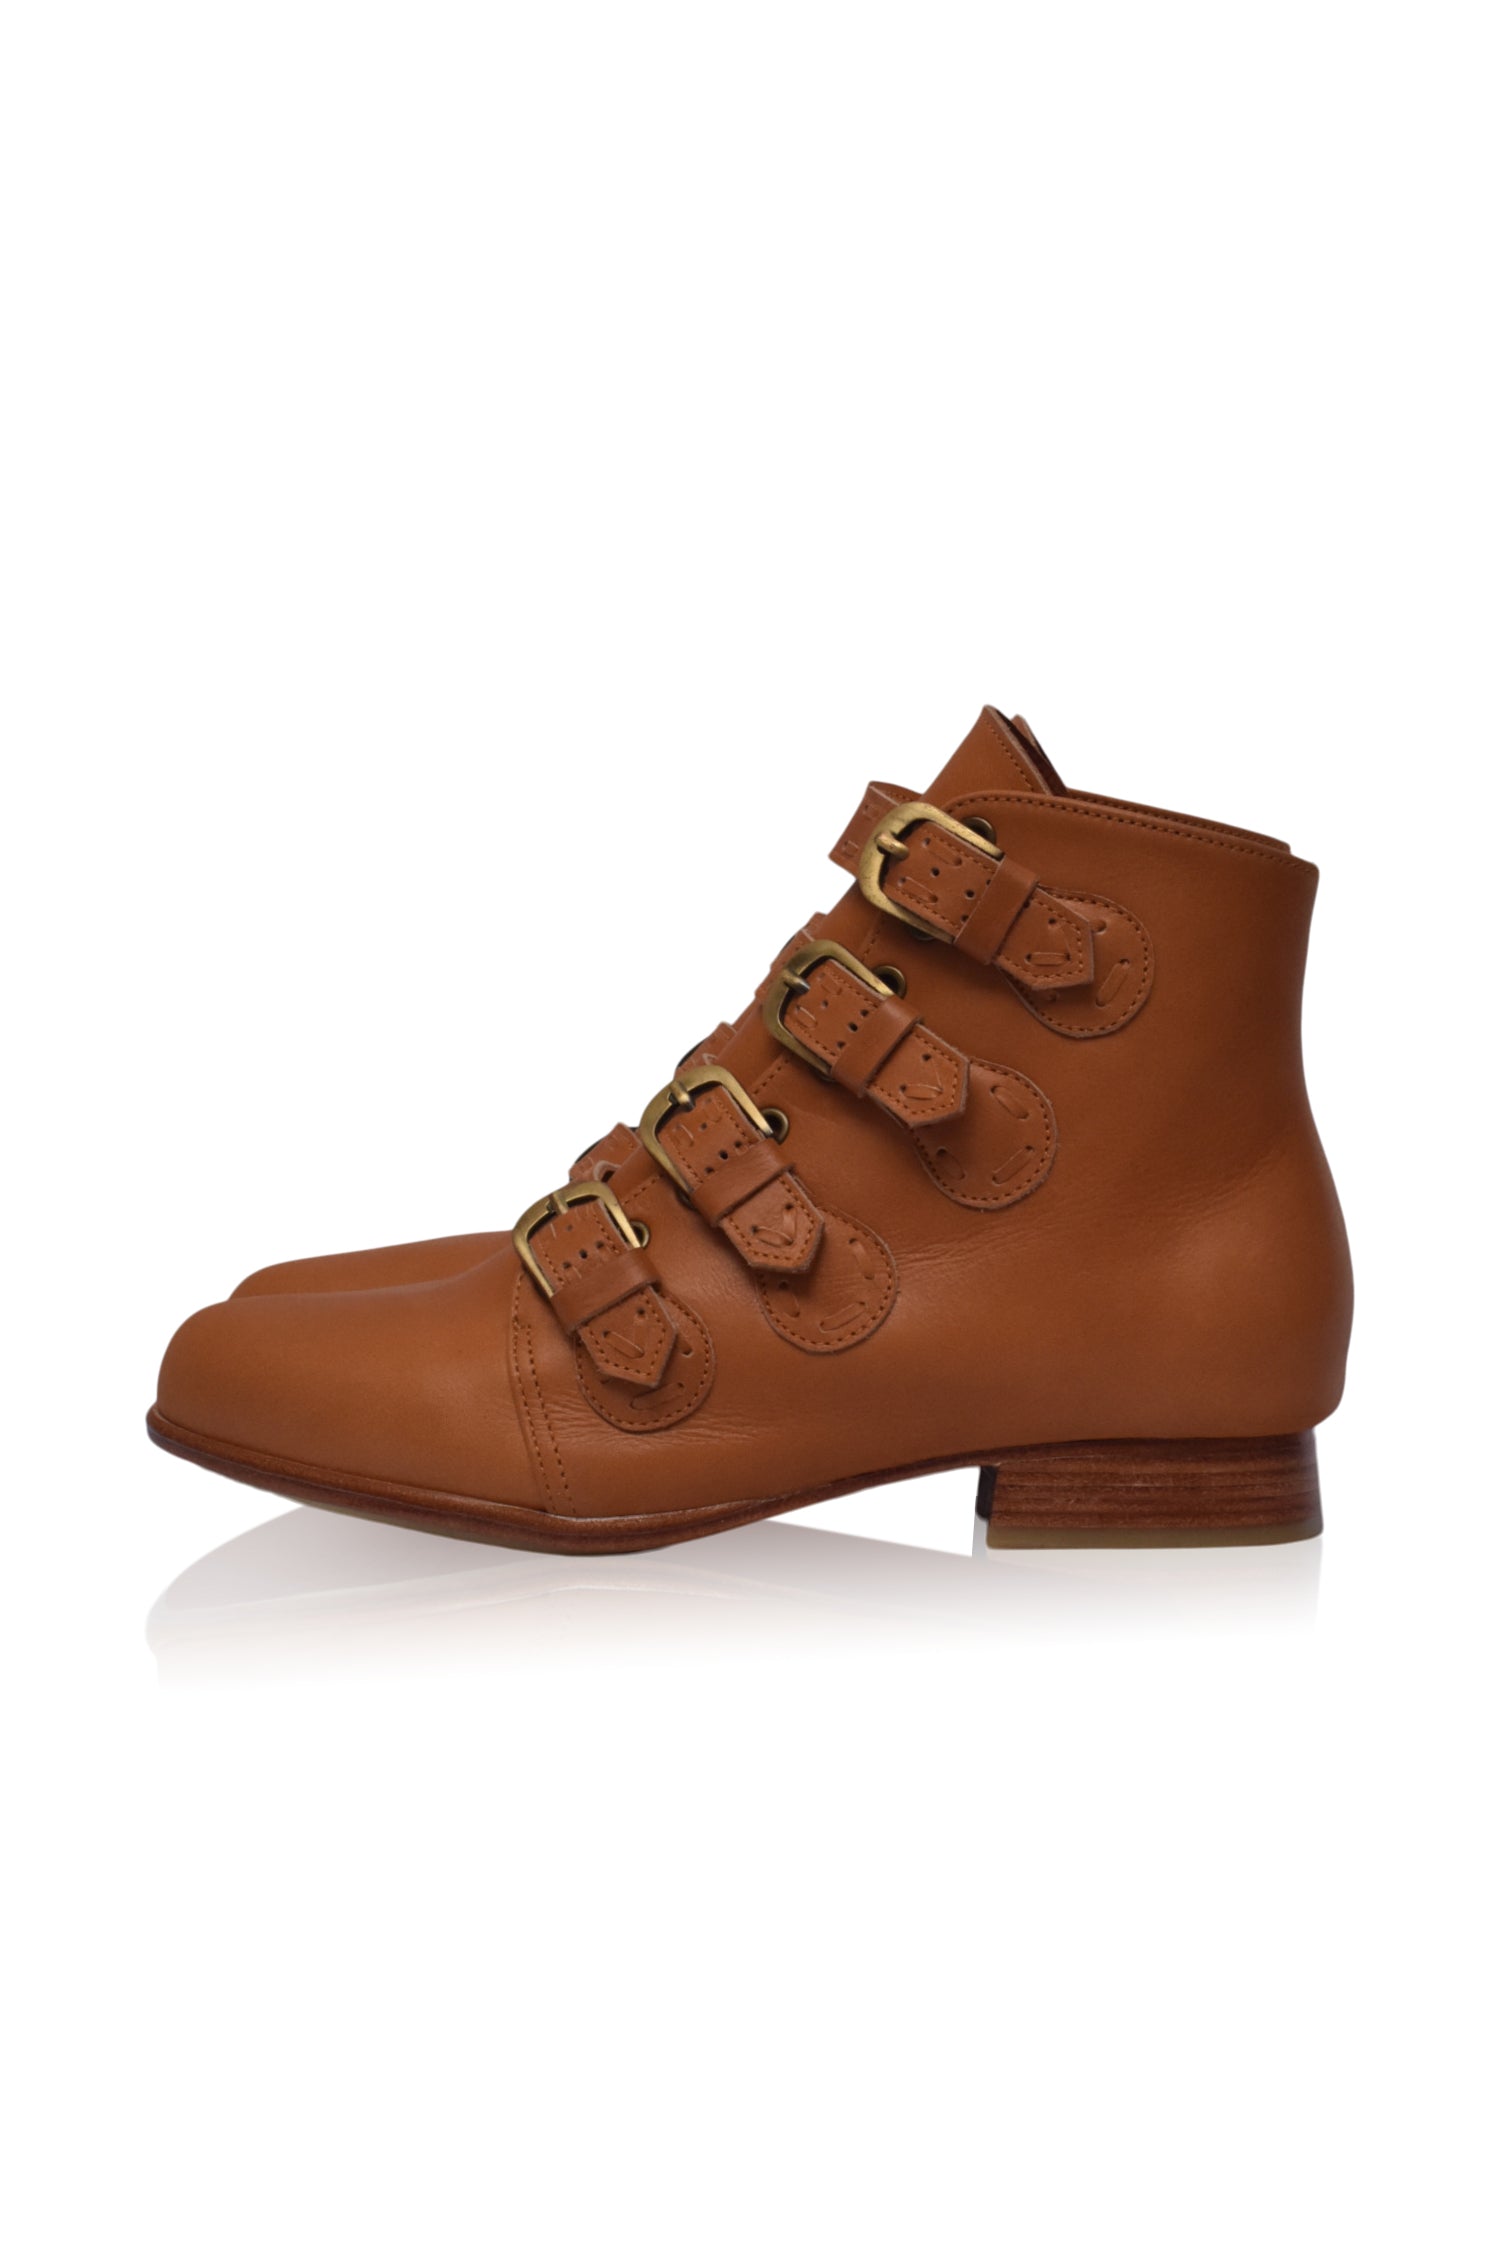 Wild Rose Leather Ankle Booties in Dark Tan